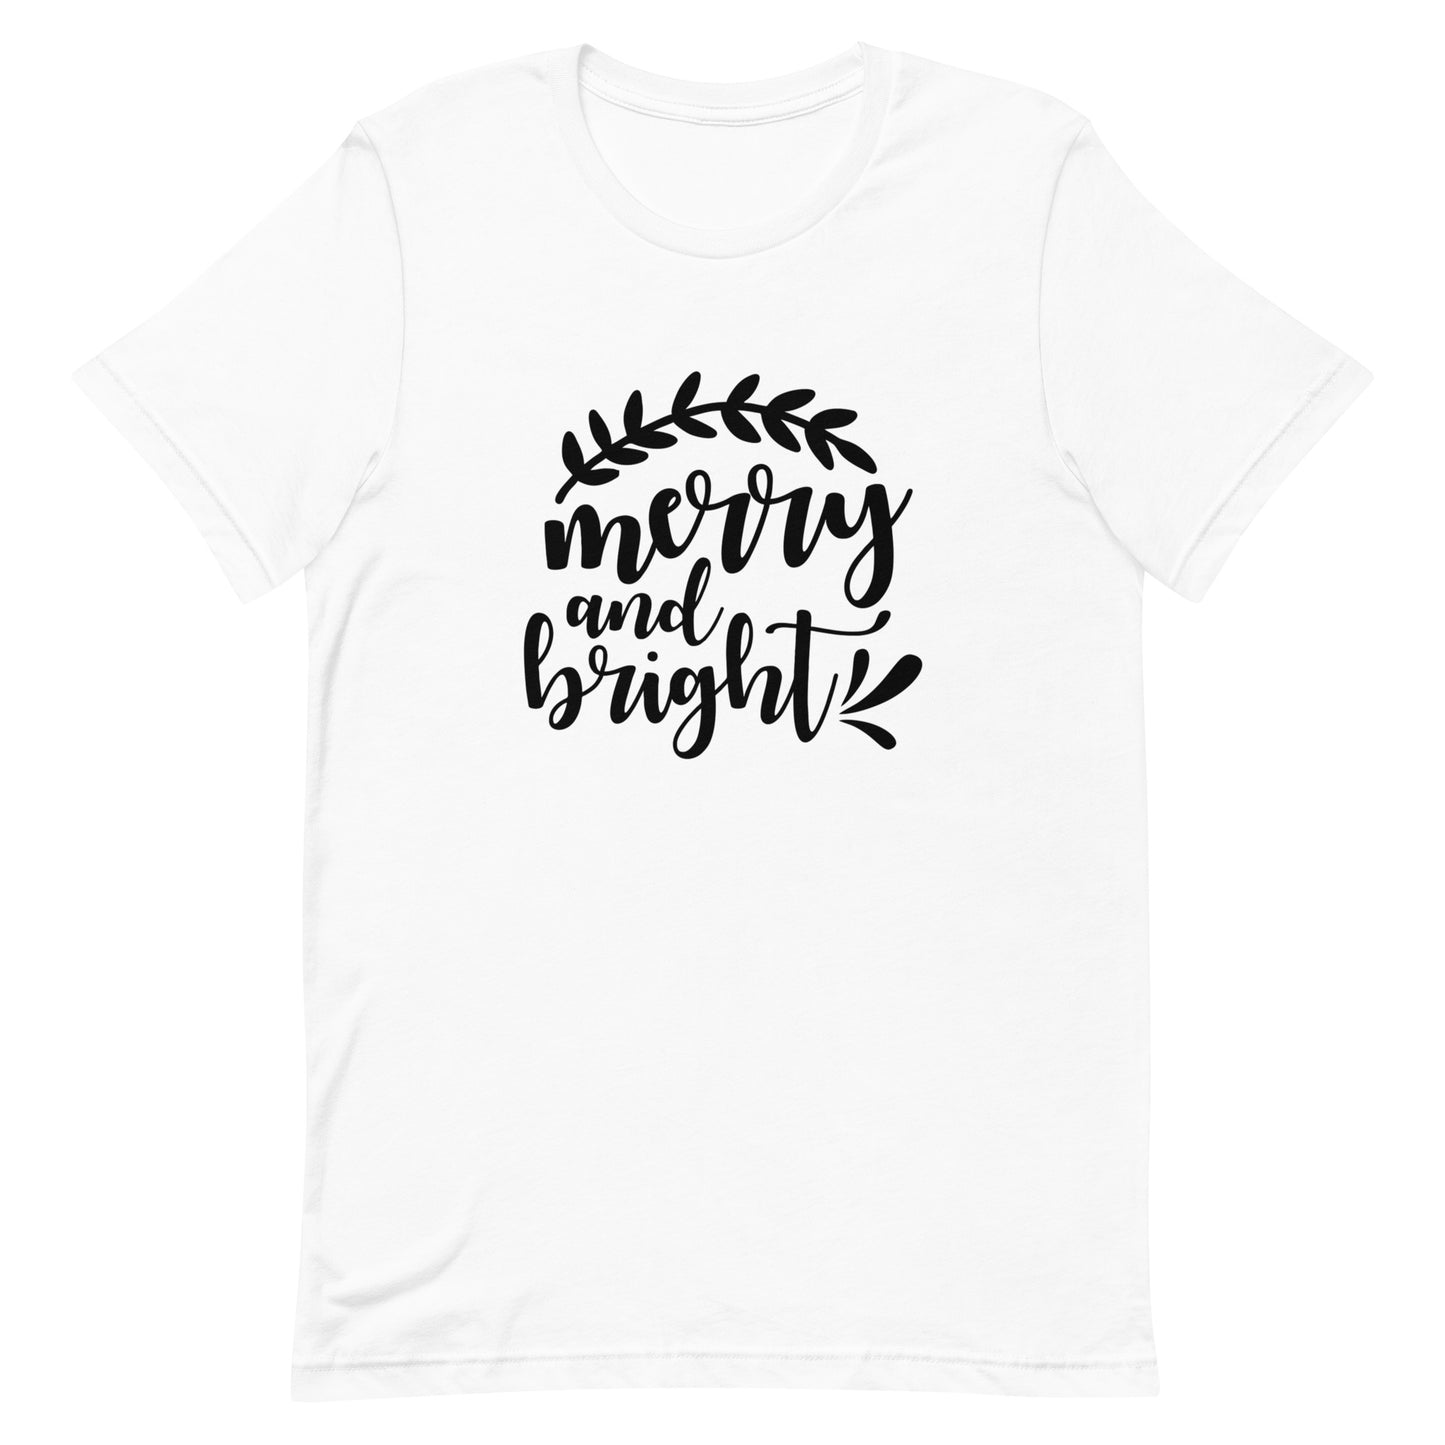 Merry and Bright Unisex t-shirt